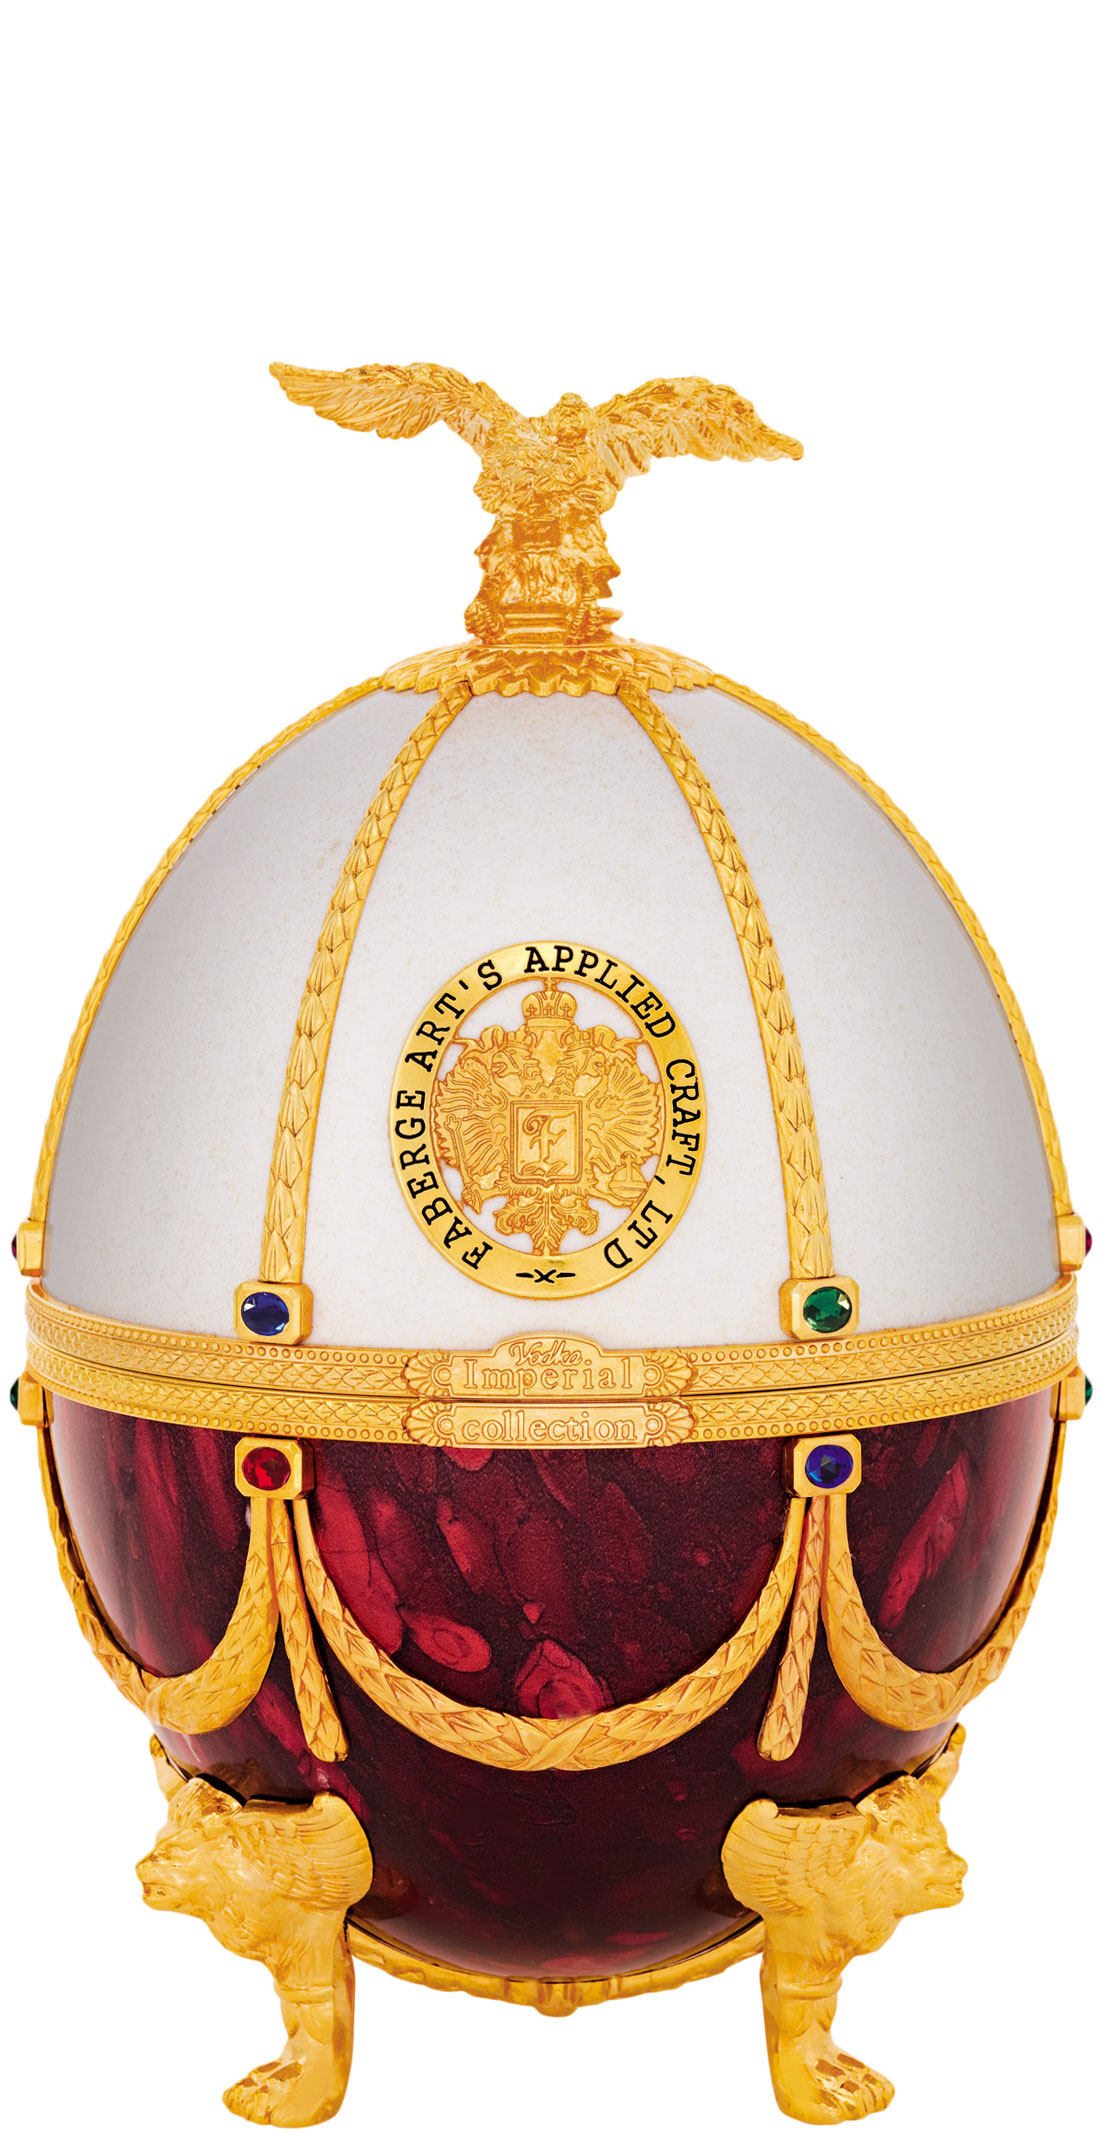 Ladoga Imperial Collection Faberge Egg Bordeaux White фото